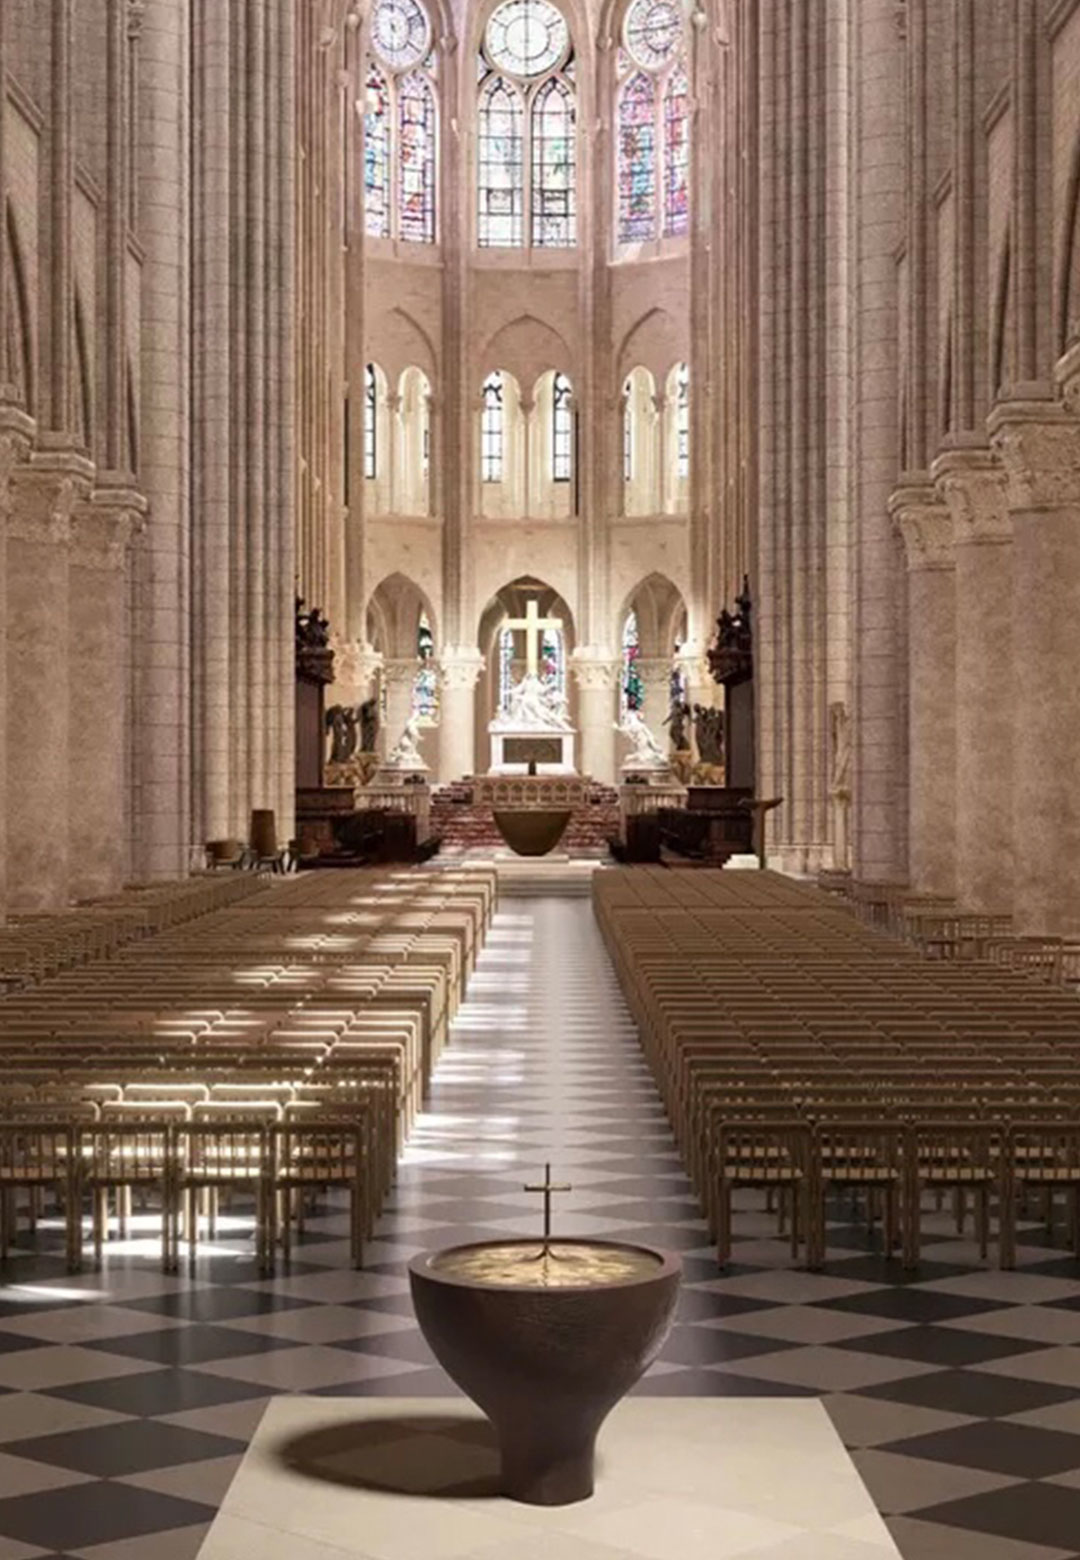 Guillaume Bardet's liturgical pieces for Notre-Dame embody rebirth and spirituality